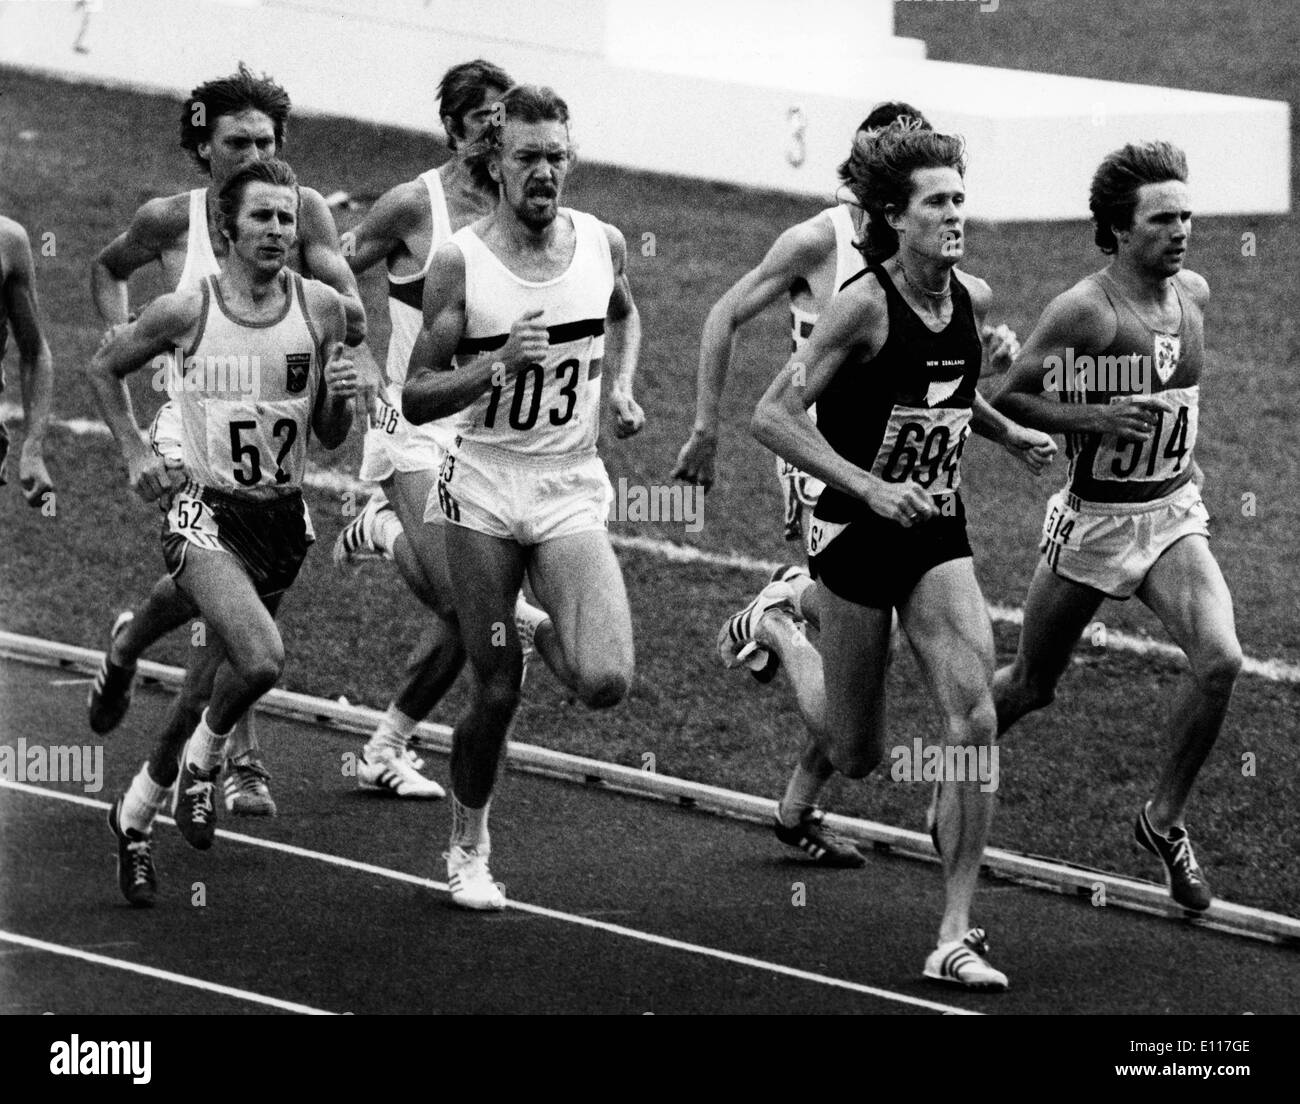 Mar 08, 1976; Montreal, Canada; Winner of the 1500 meter dash JOHN WALKER at the Olympic Games 1976 in Montreal.. Stock Photo